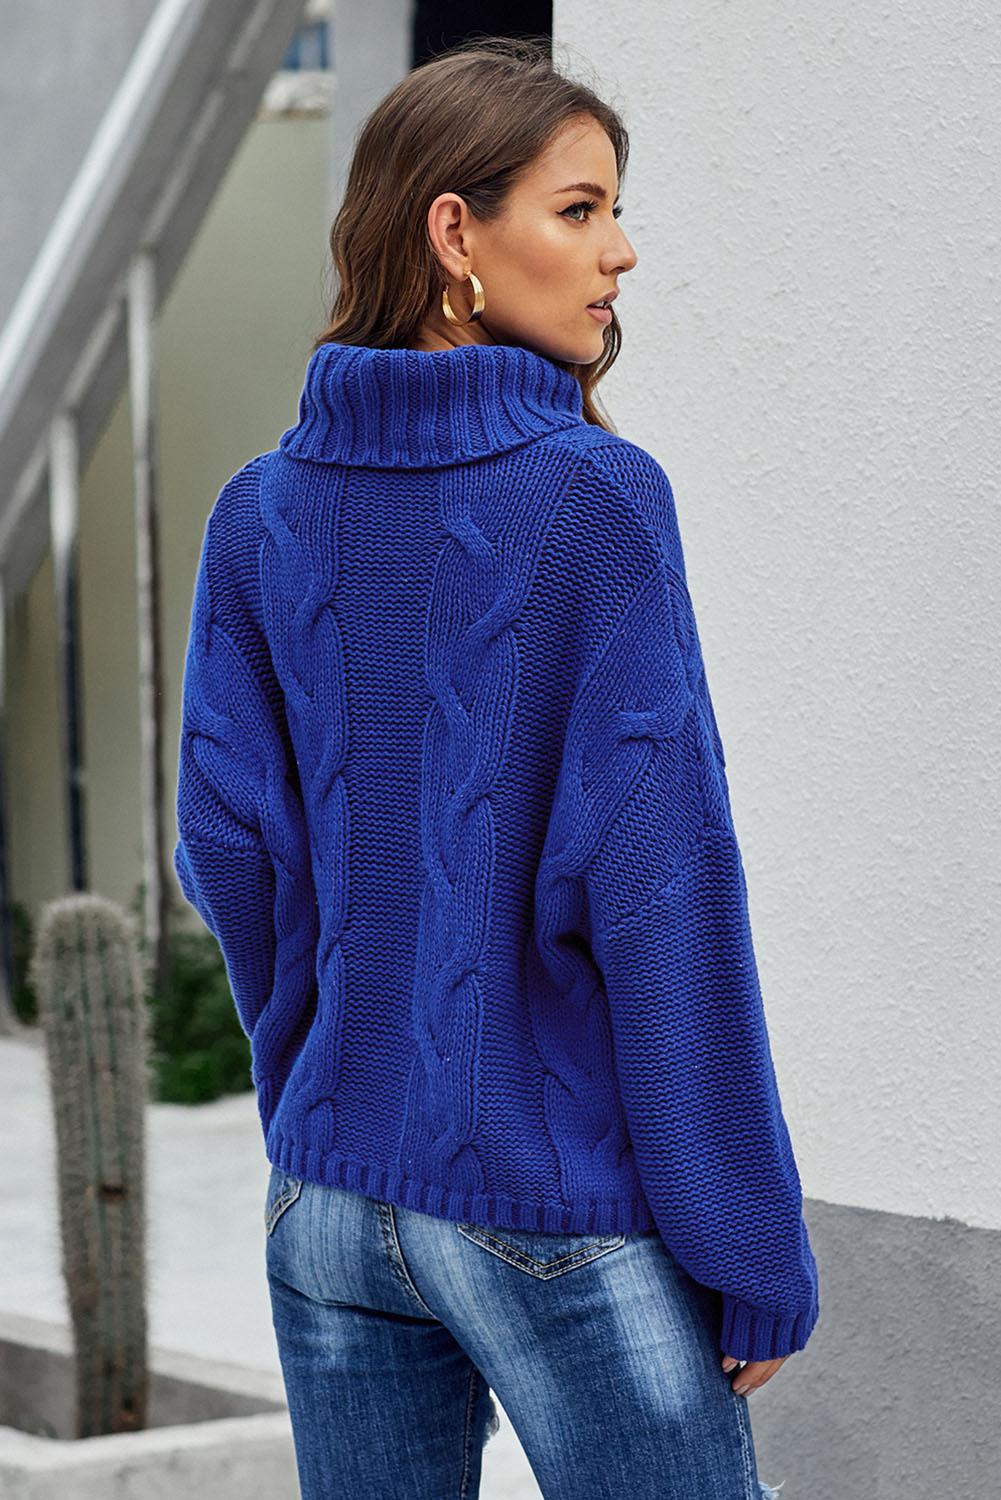 Blue Handmade Cable Knit Turtleneck Sweater